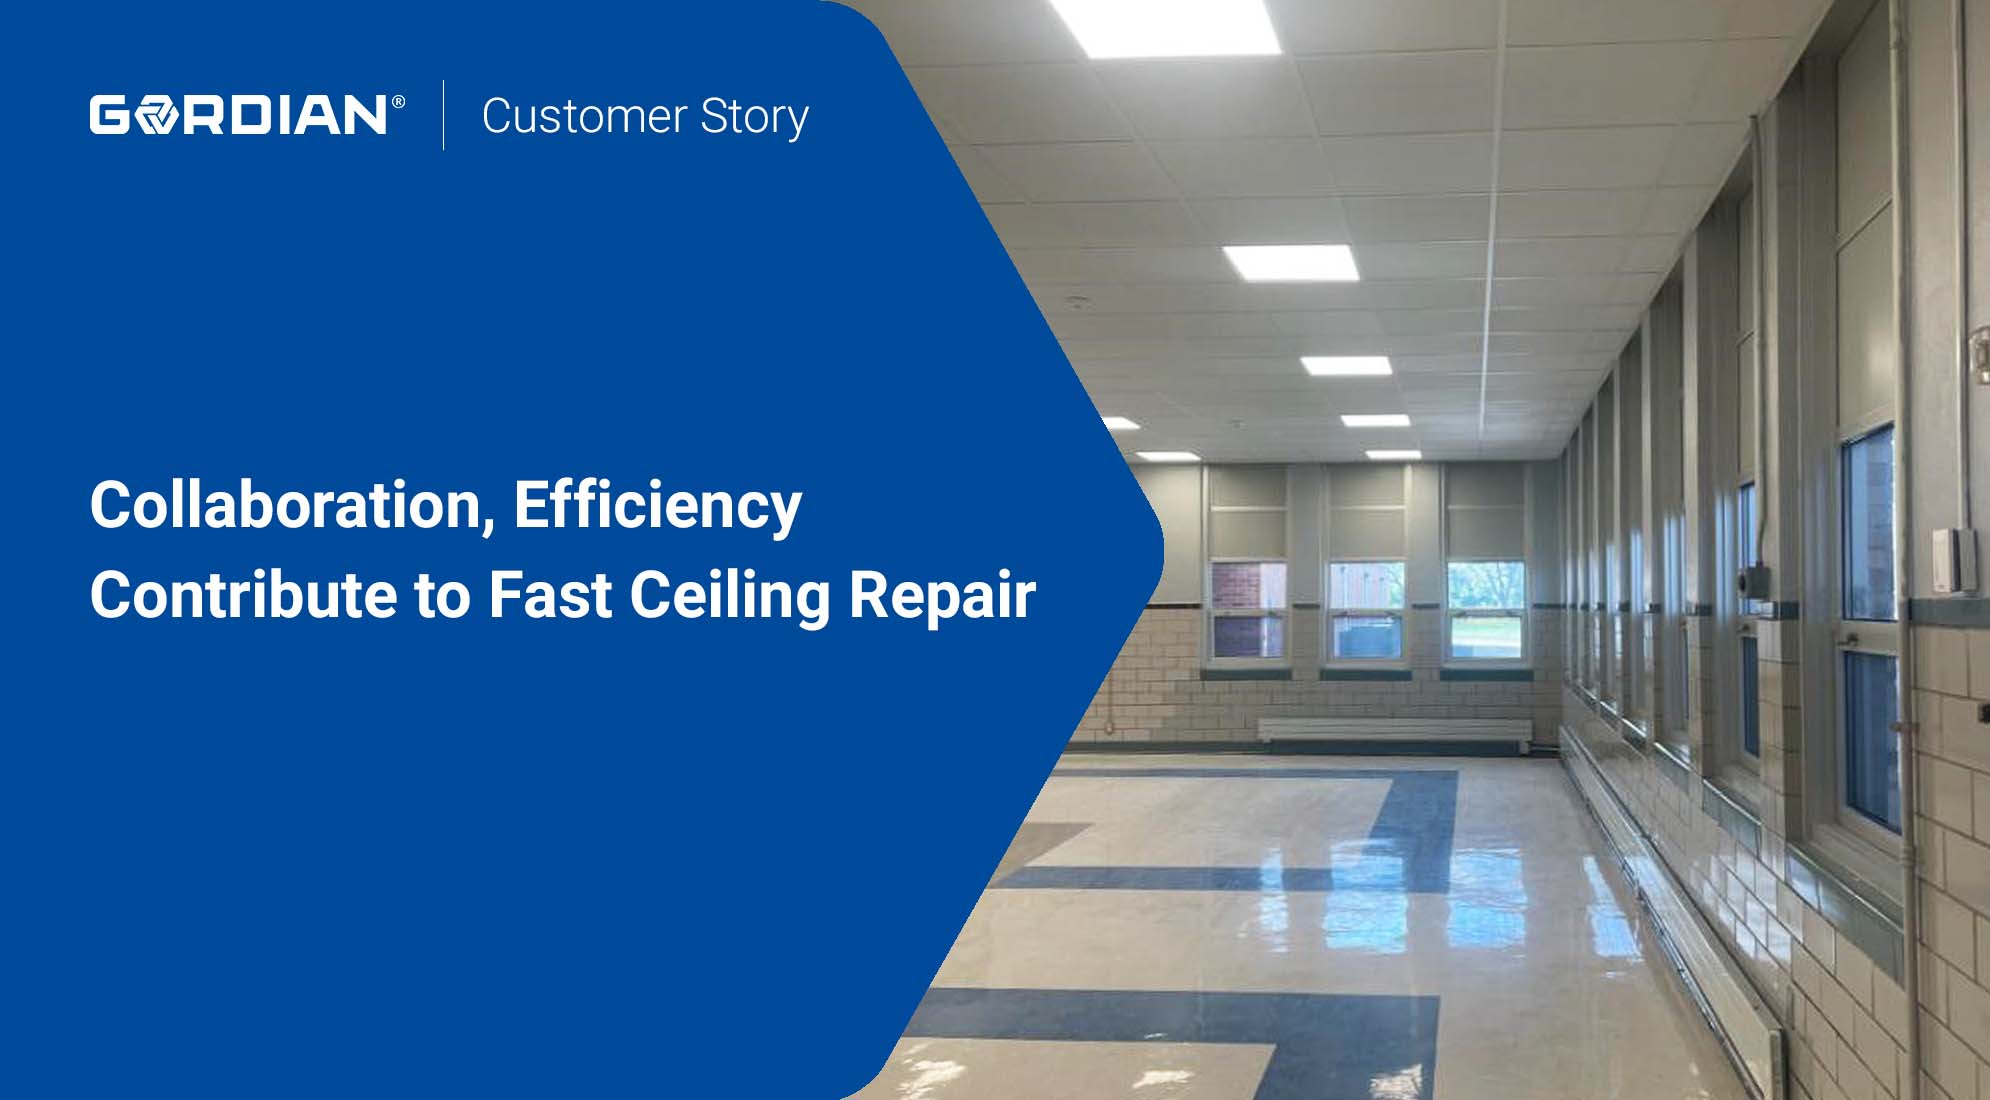 Rural School Cafeteria Renovated Quickly with ezIQC®️ 3